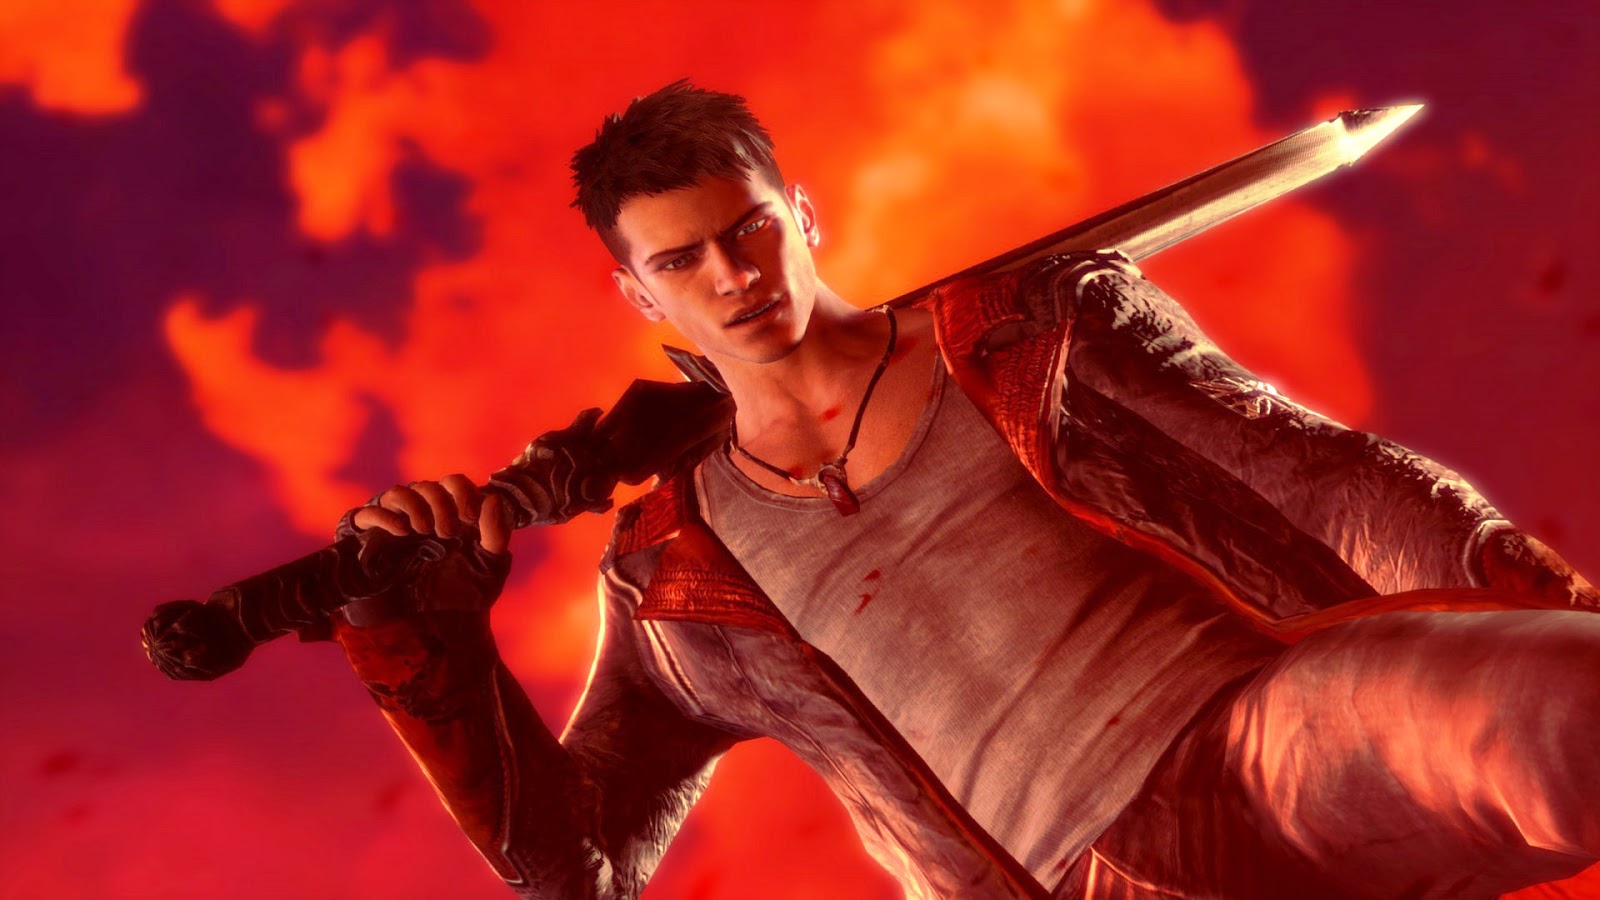 New DMC Game, Devil May Cry 2 Remake in Development?!